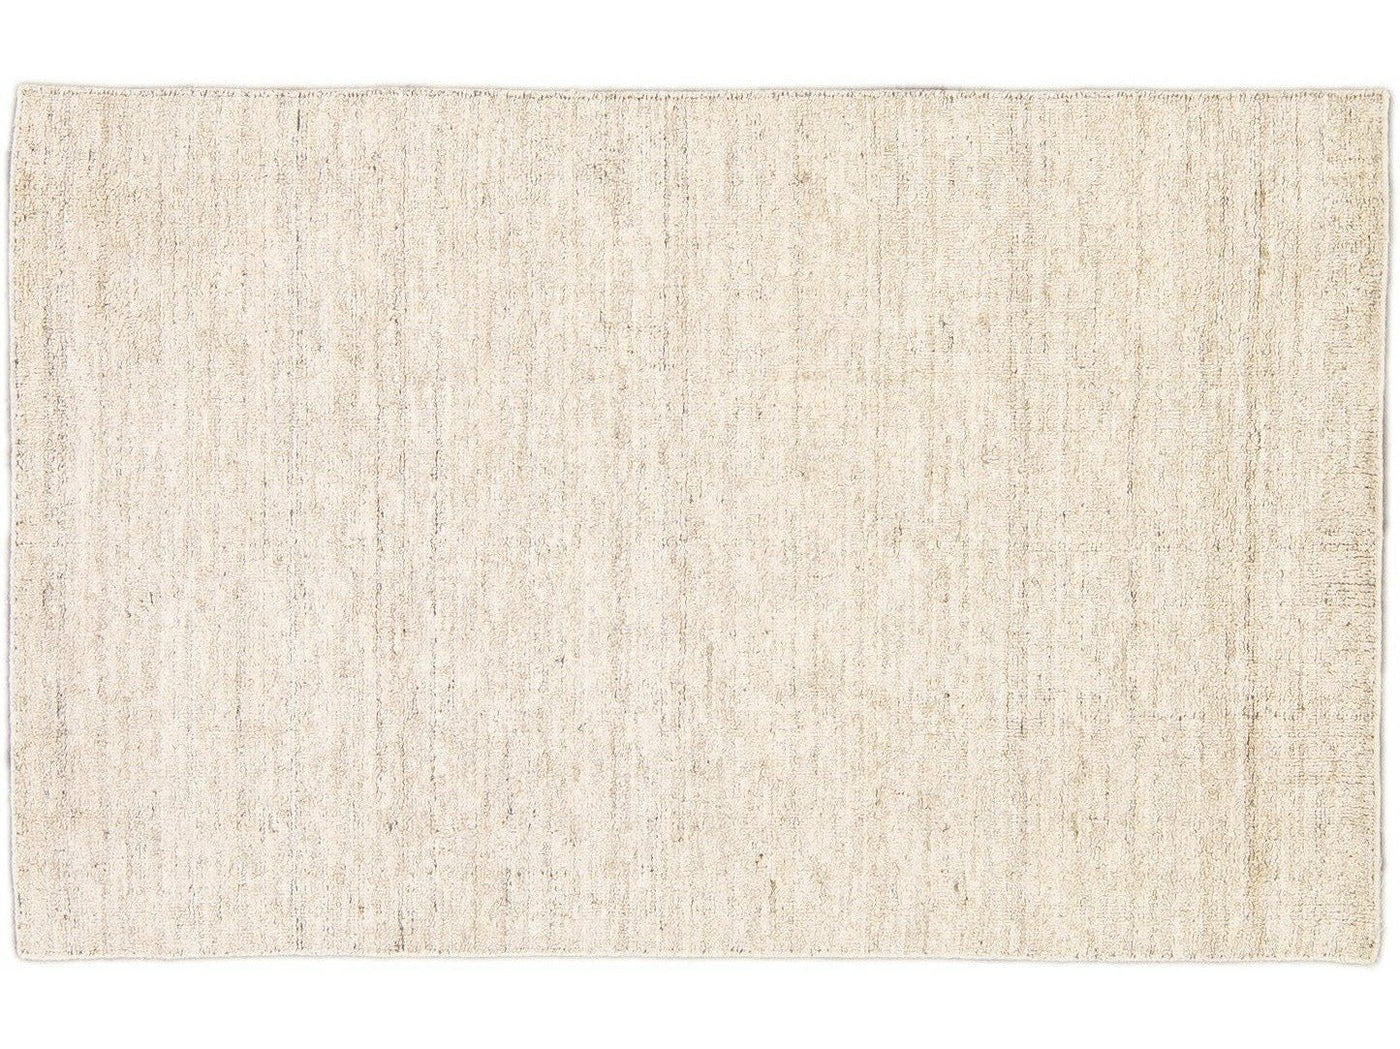 Beautiful Modern Delino hand-loom wool beige field. This piece has a gorgeous all-over solid design.  This rug measures 5' x 8'.  